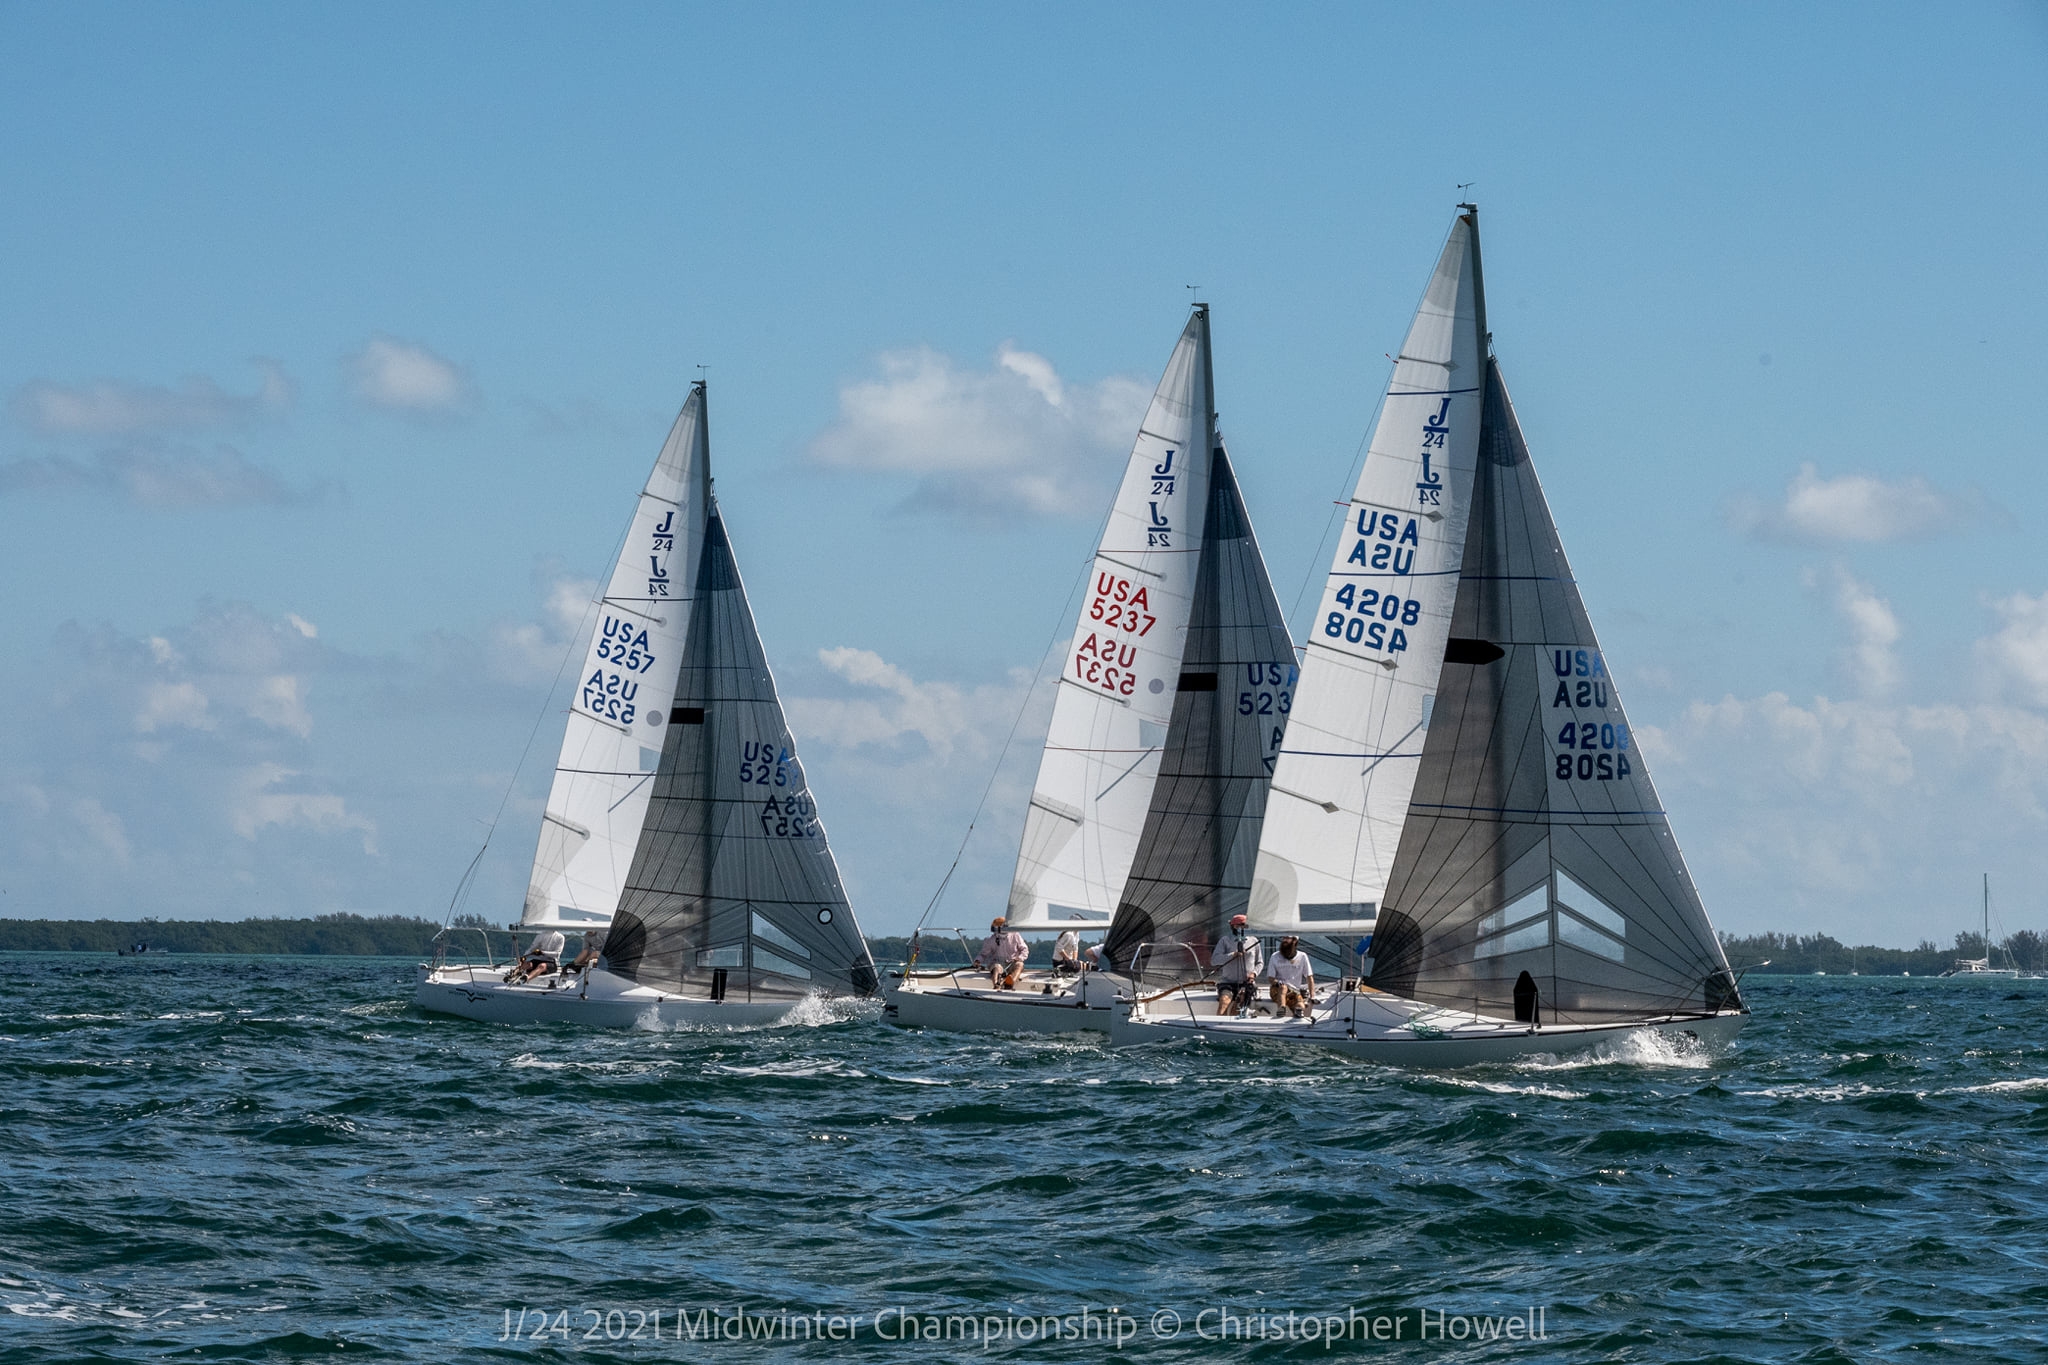  J/24  2021 Midwinter Championship  Miami FL  Day 1  Carter White on Wind Monkey first leader 